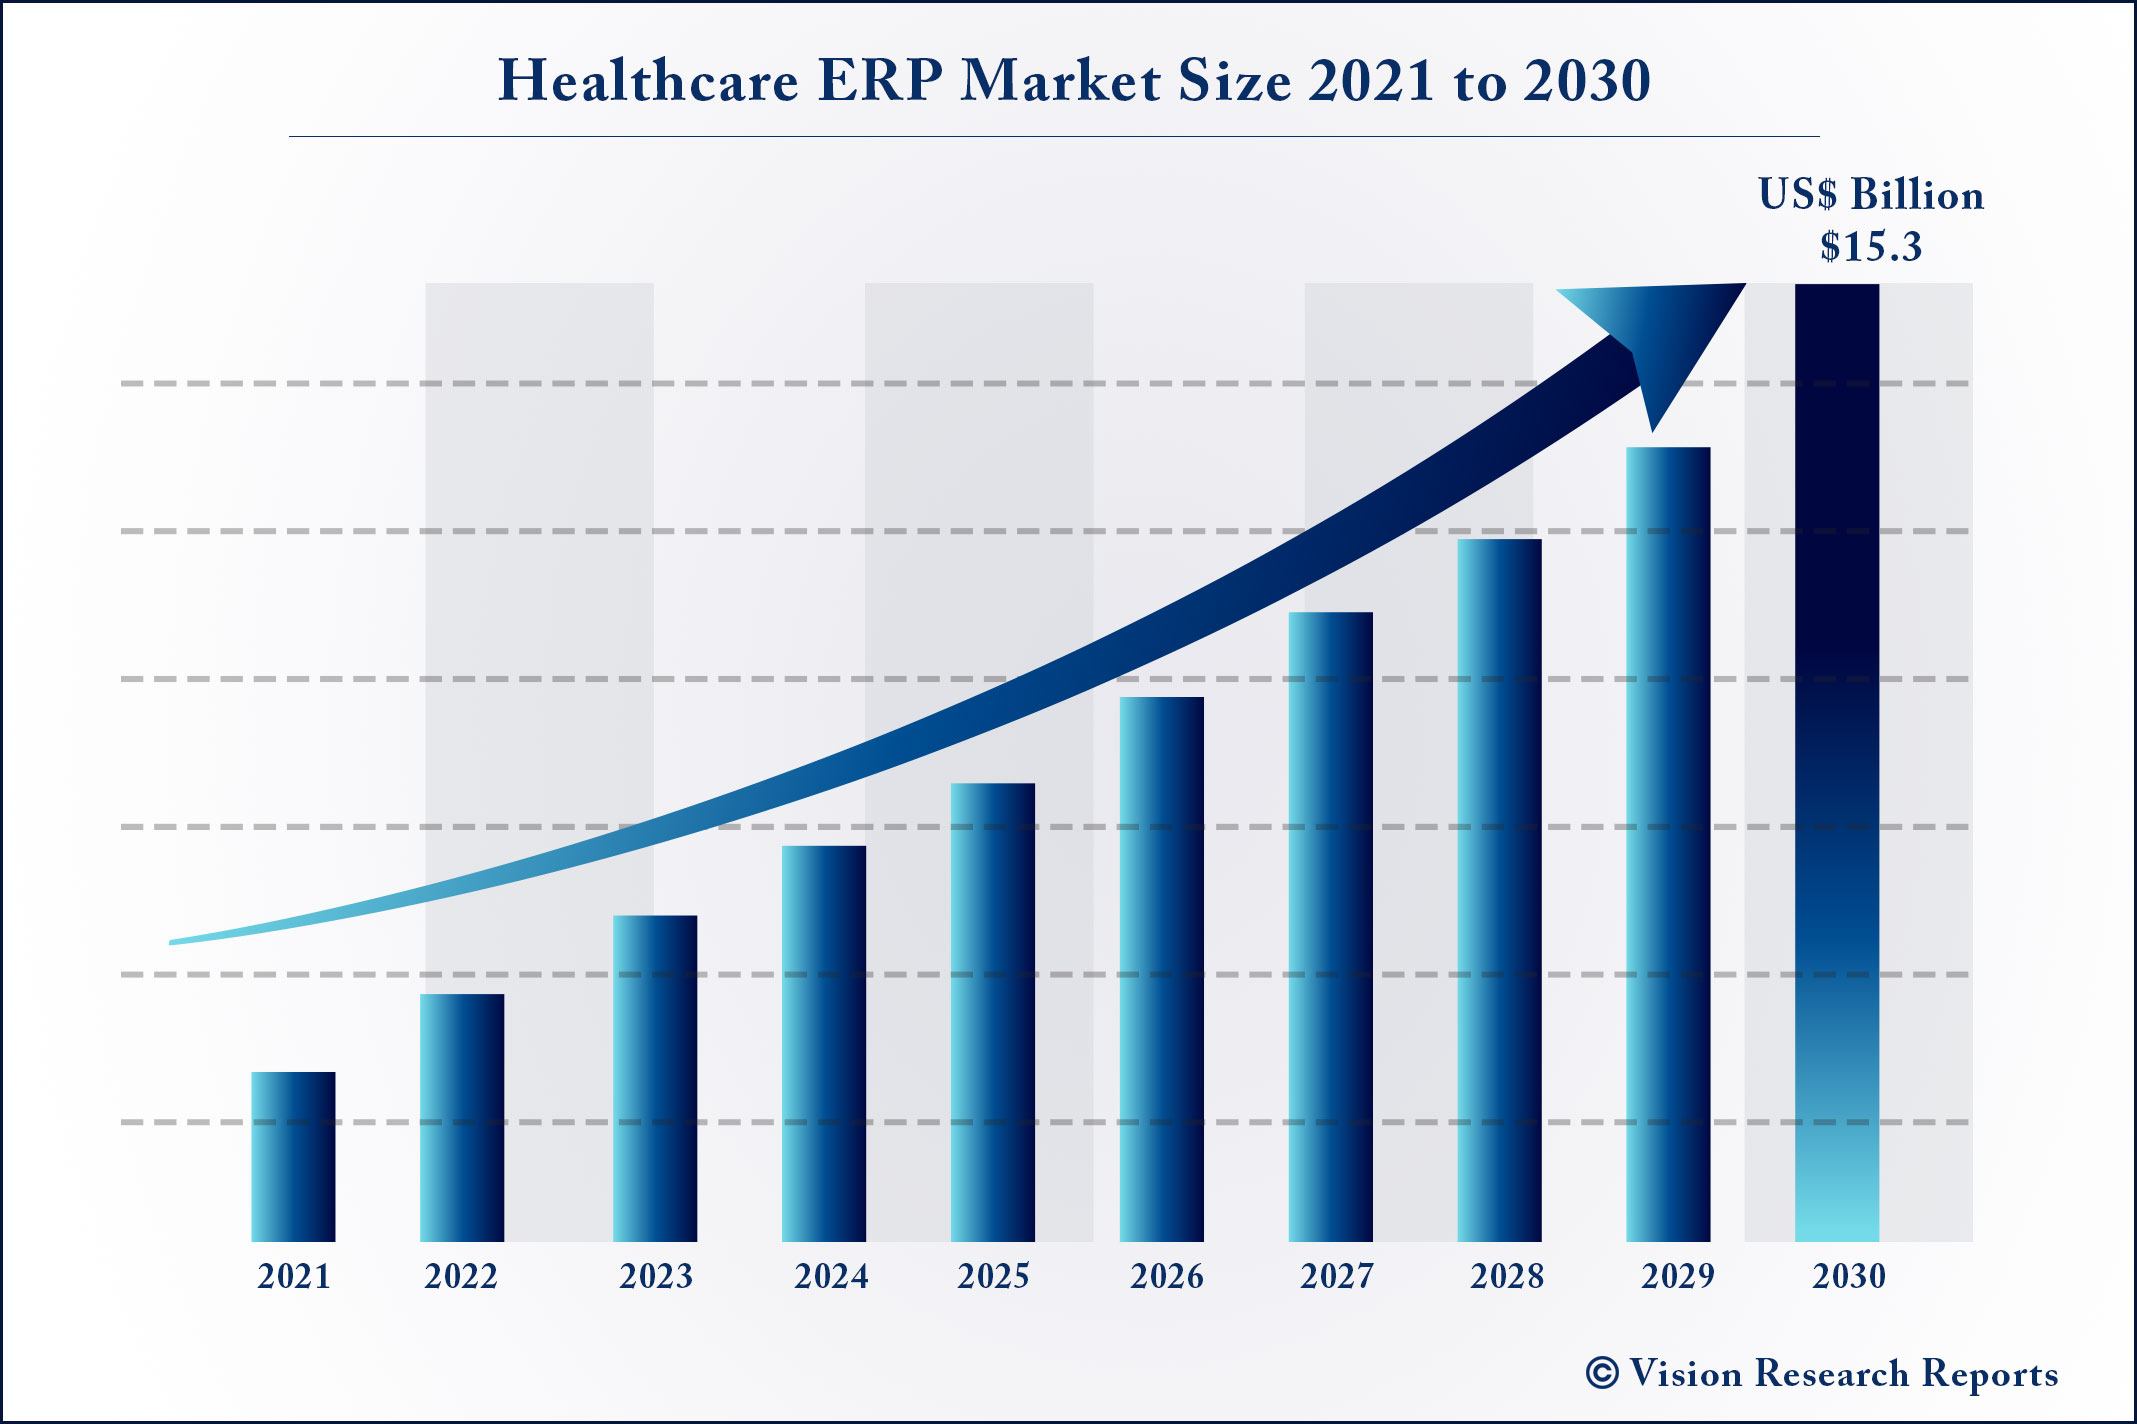 Healthcare ERP Market Size 2021 to 2030